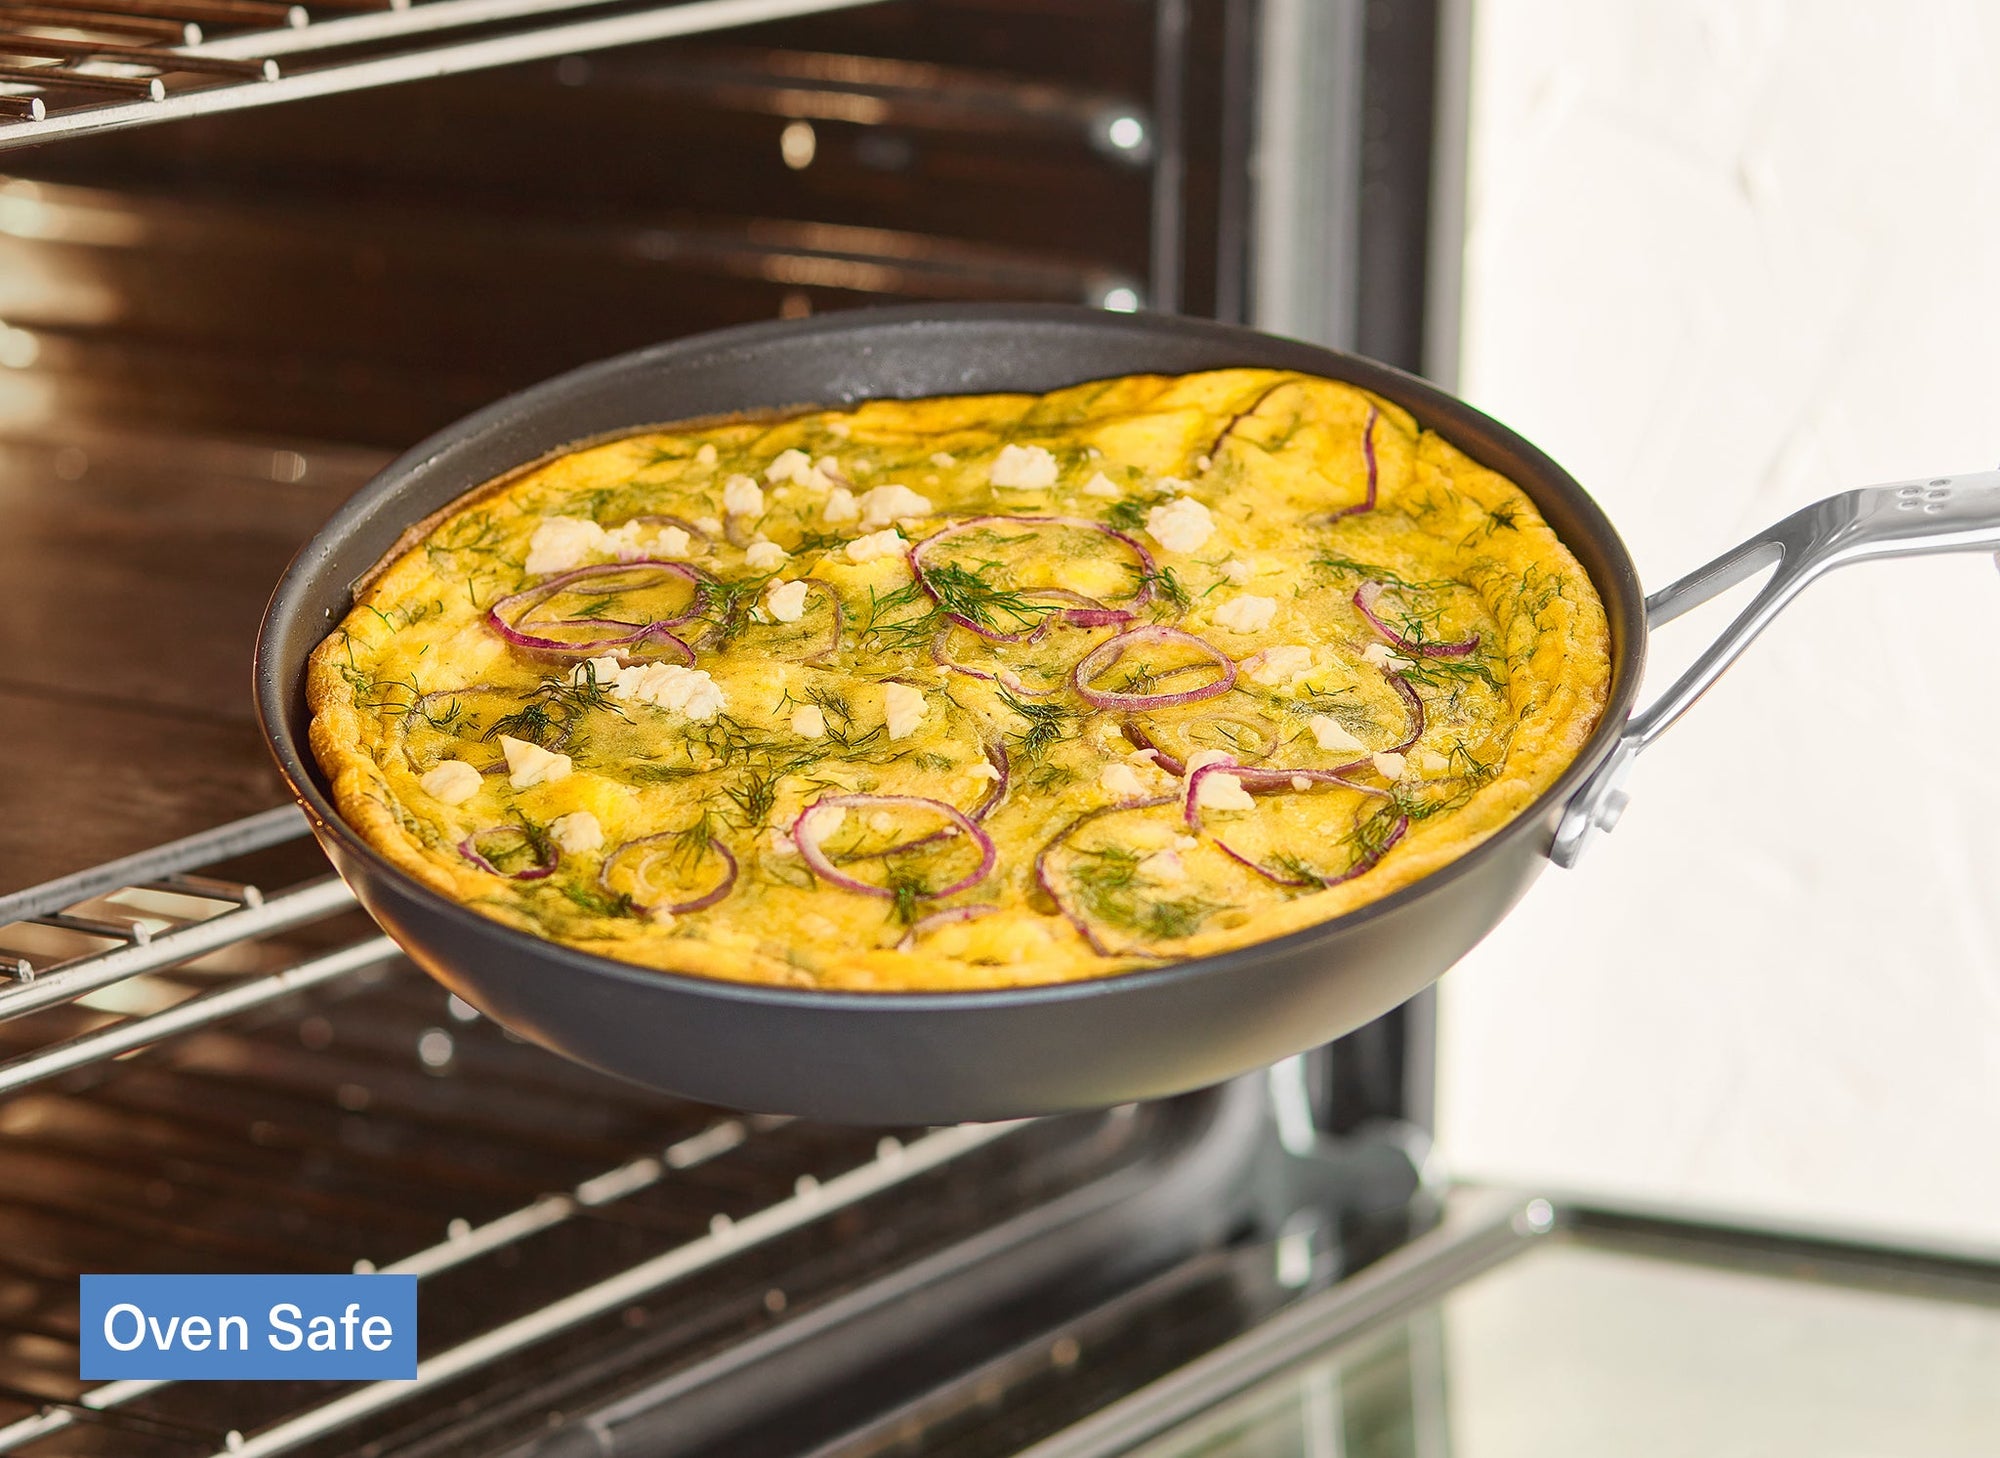 A Misen Nonstick Pan is being pulled out of an oven. Inside is a frittata with onions, herbs, and cheese. A caption reads “Oven Safe”